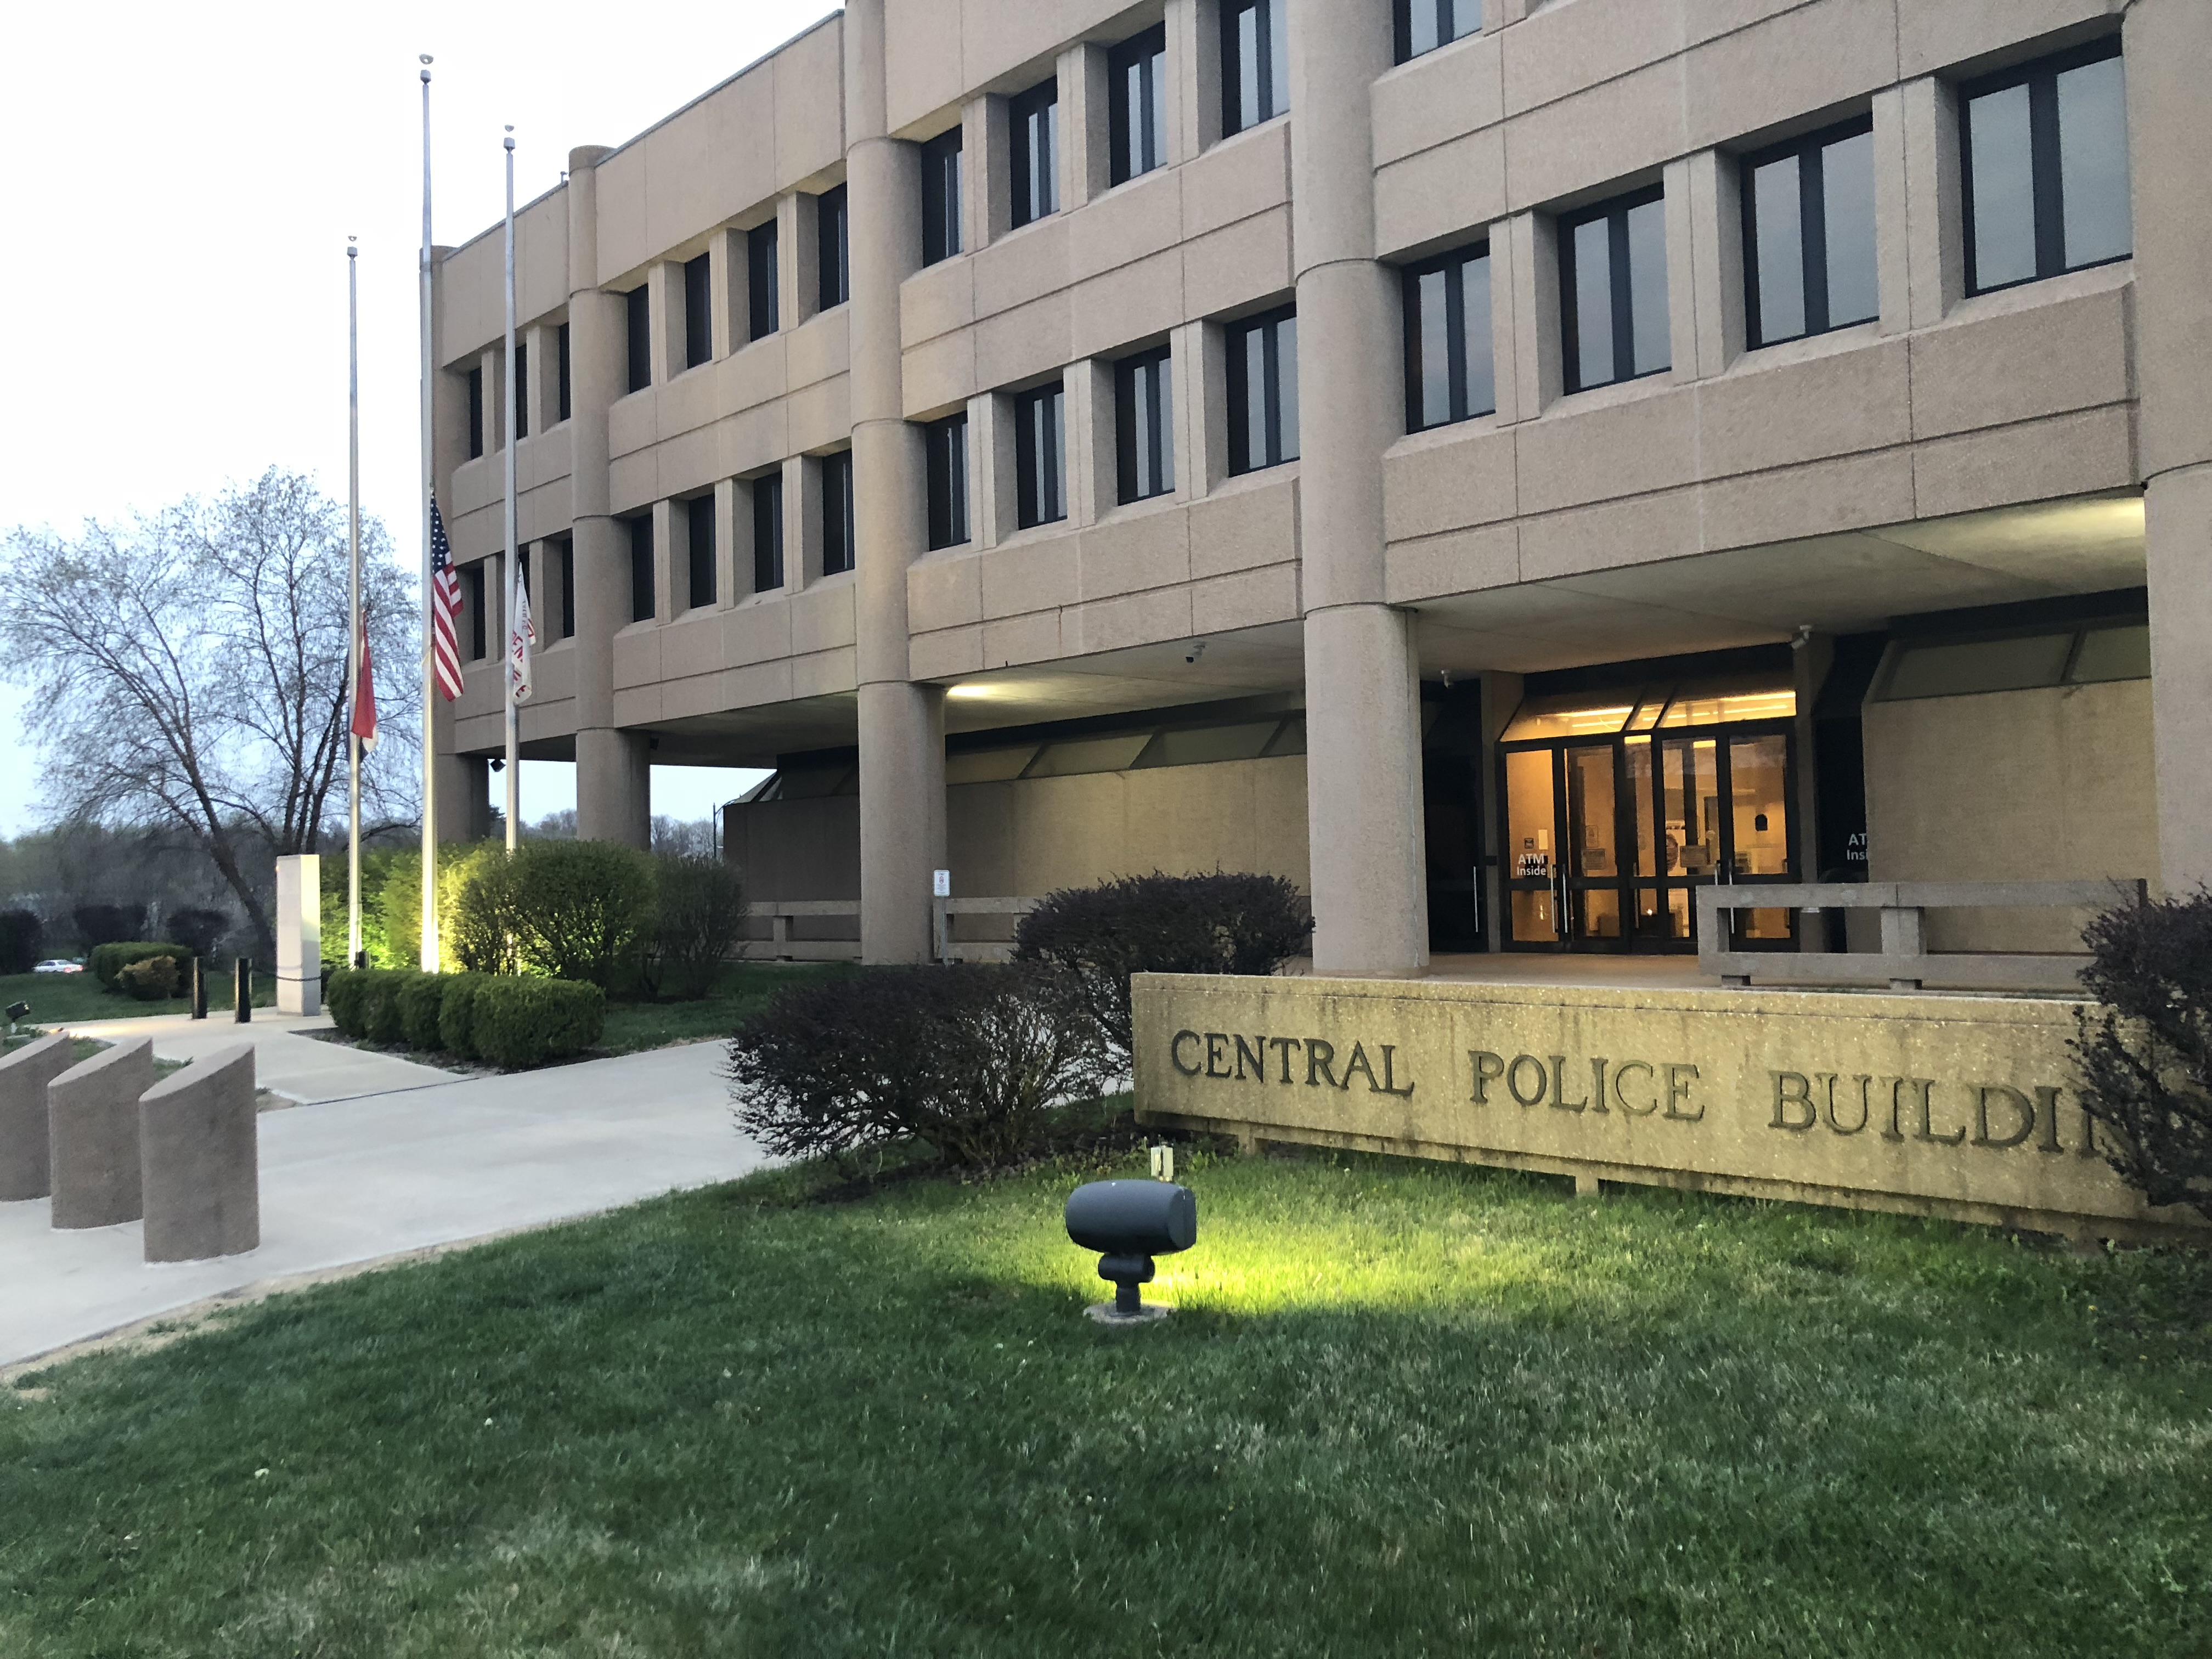 Lights shine on the front of the Central Police Building also known as Independence Police Headquarters in the early morning hours.